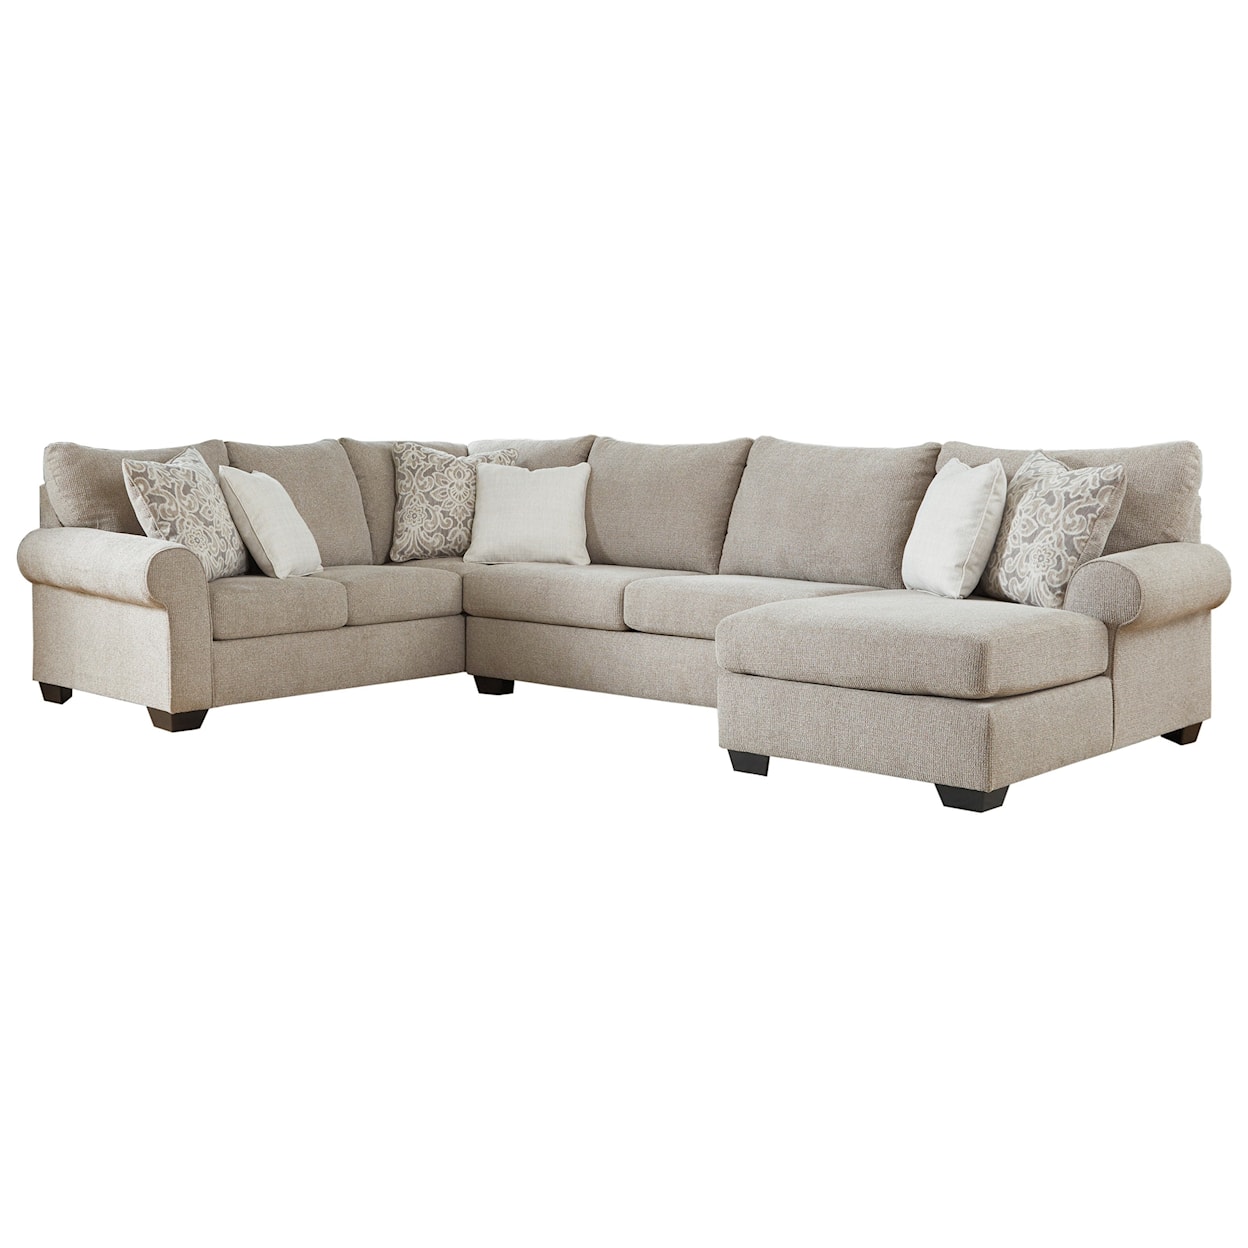 Benchcraft Baranello 3-Piece Sectional with Right Chaise